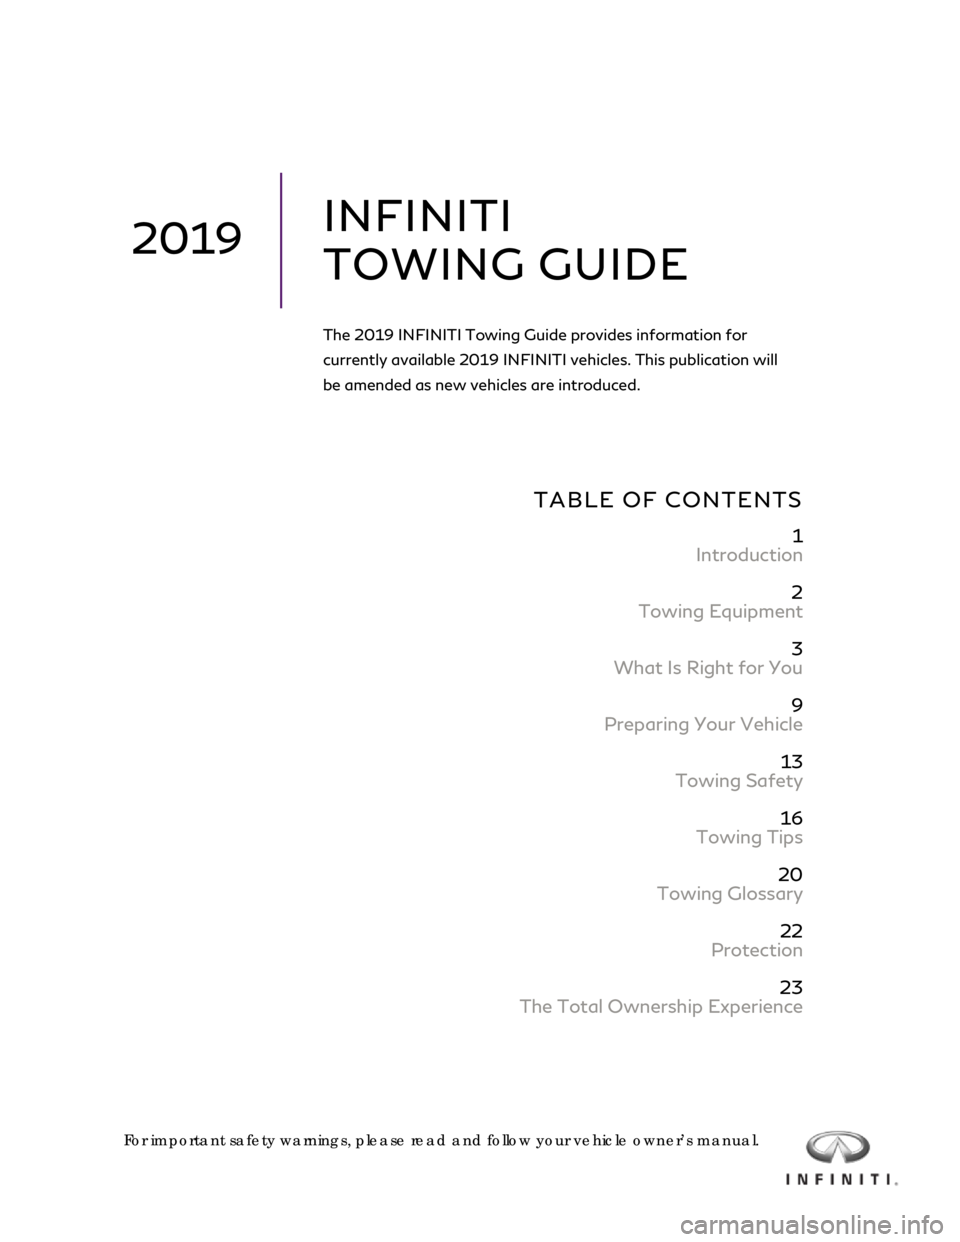 INFINITI Q70 2019  Towing Guide   
 
 
 
 
 
 
 
 
 
TABLE OF CONTENTS  
 
1 
Introduction 
 
2 
Towing Equipment 
 
3 
What Is Right for You 
 
9 
Preparing Your Vehicle 
 
13 
Towing Safety 
 
16 
Towing Tips 
 
20 
Towing Glossar